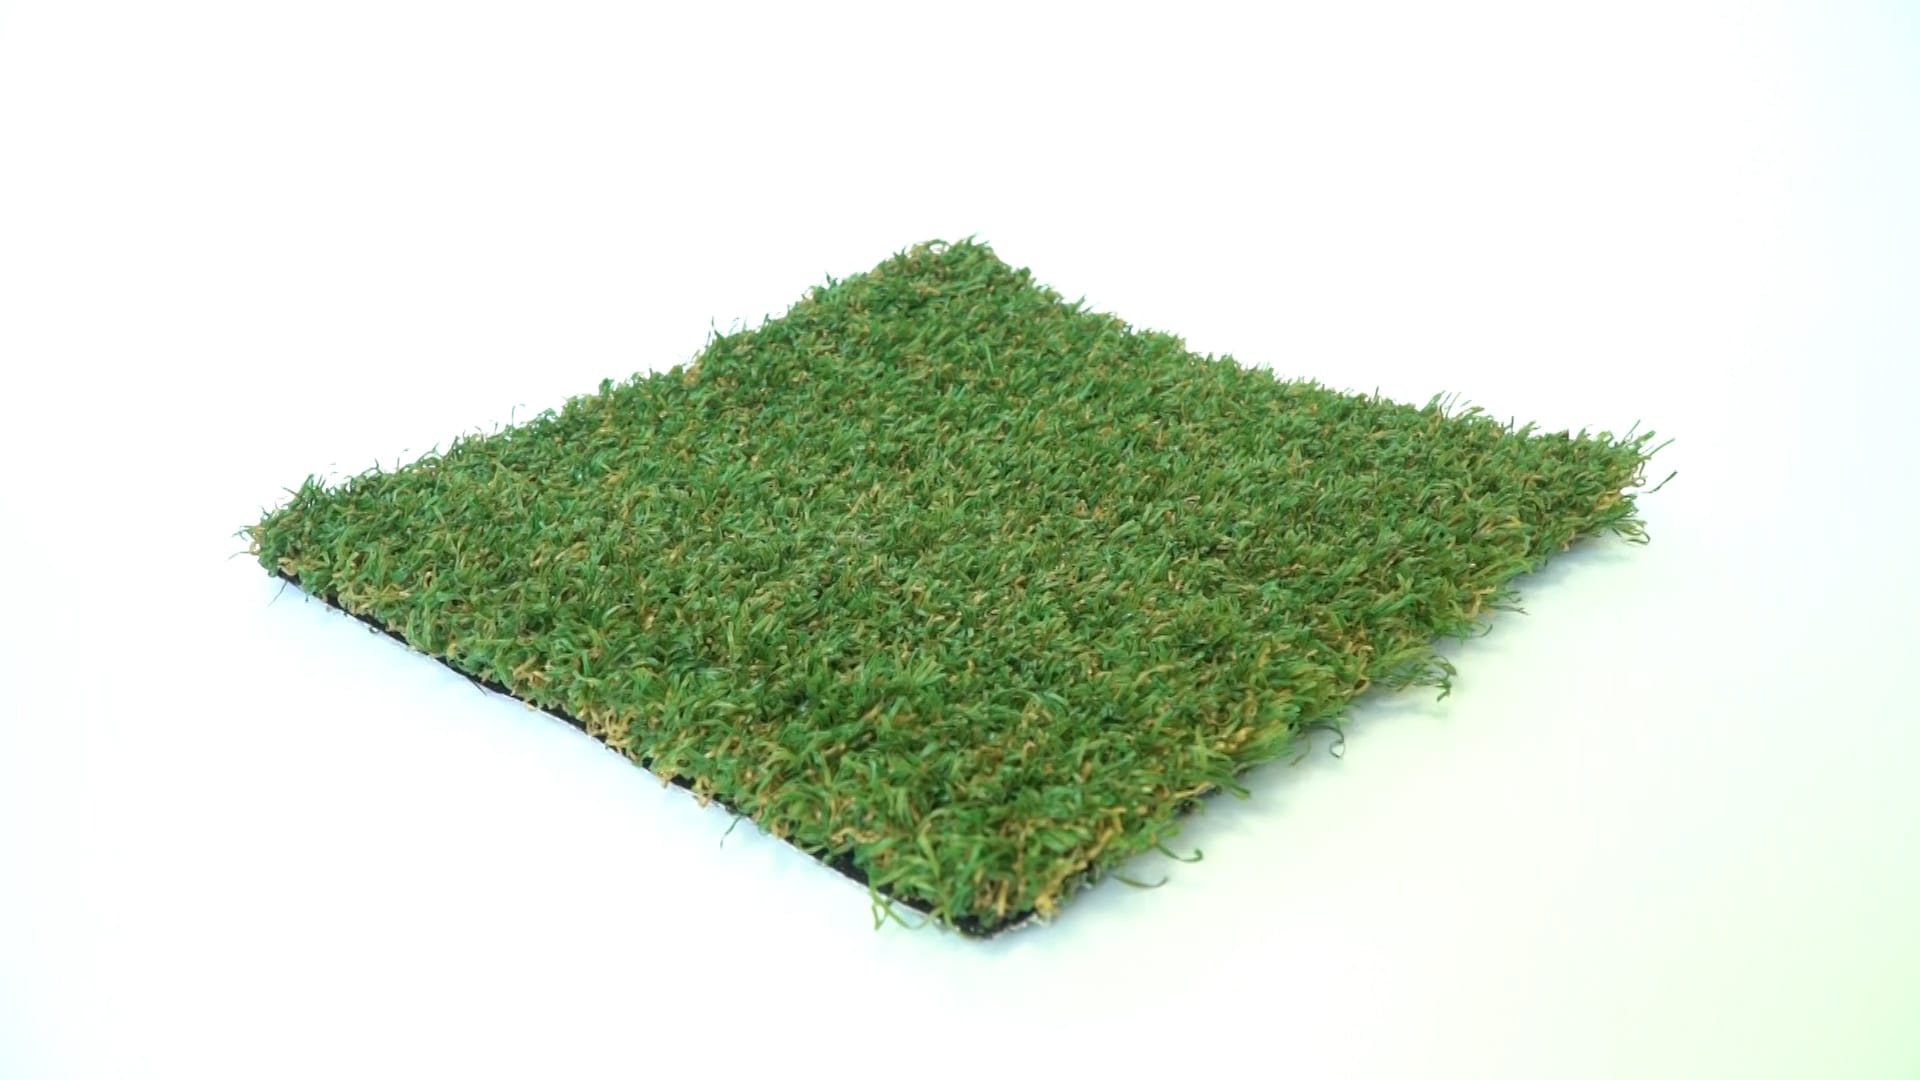 Playscape Playground Grass